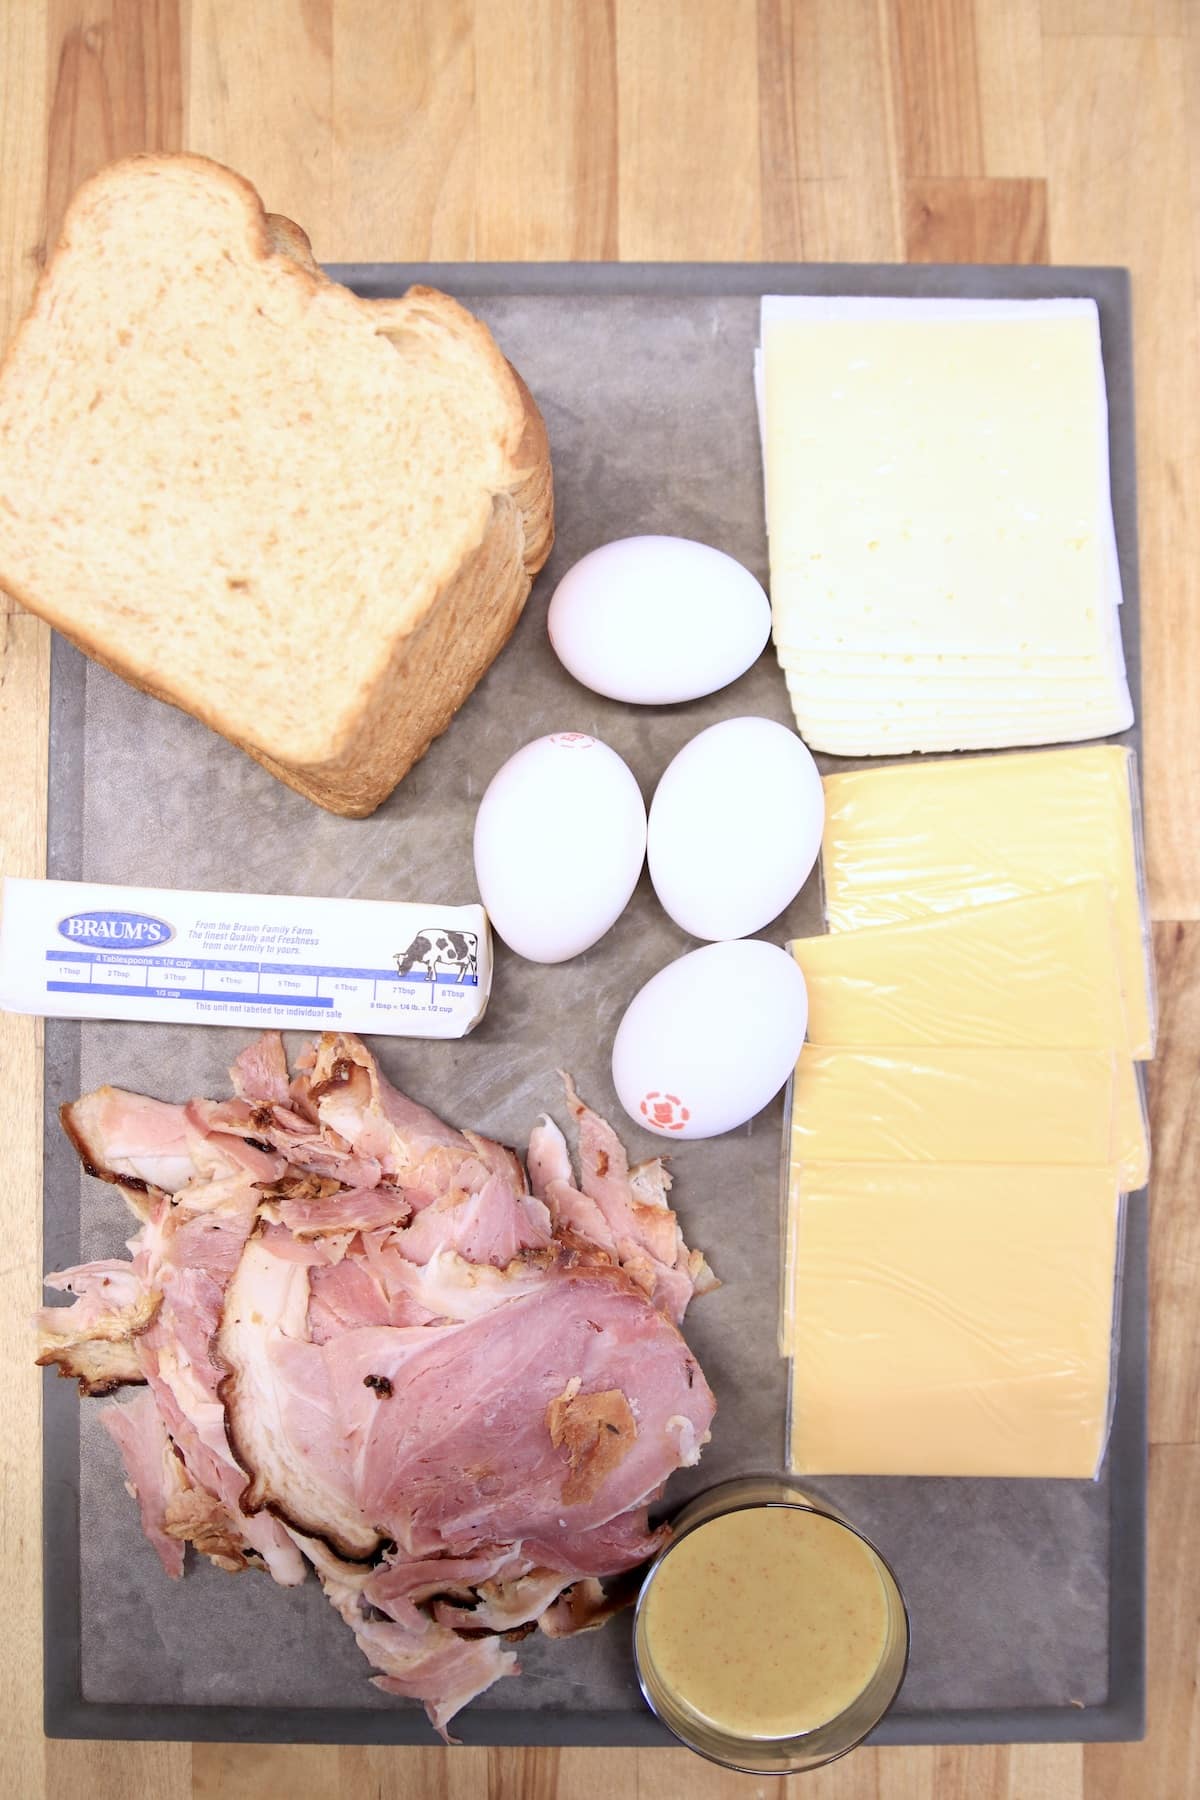 Ingredients for ham, egg and cheese sandwiches.